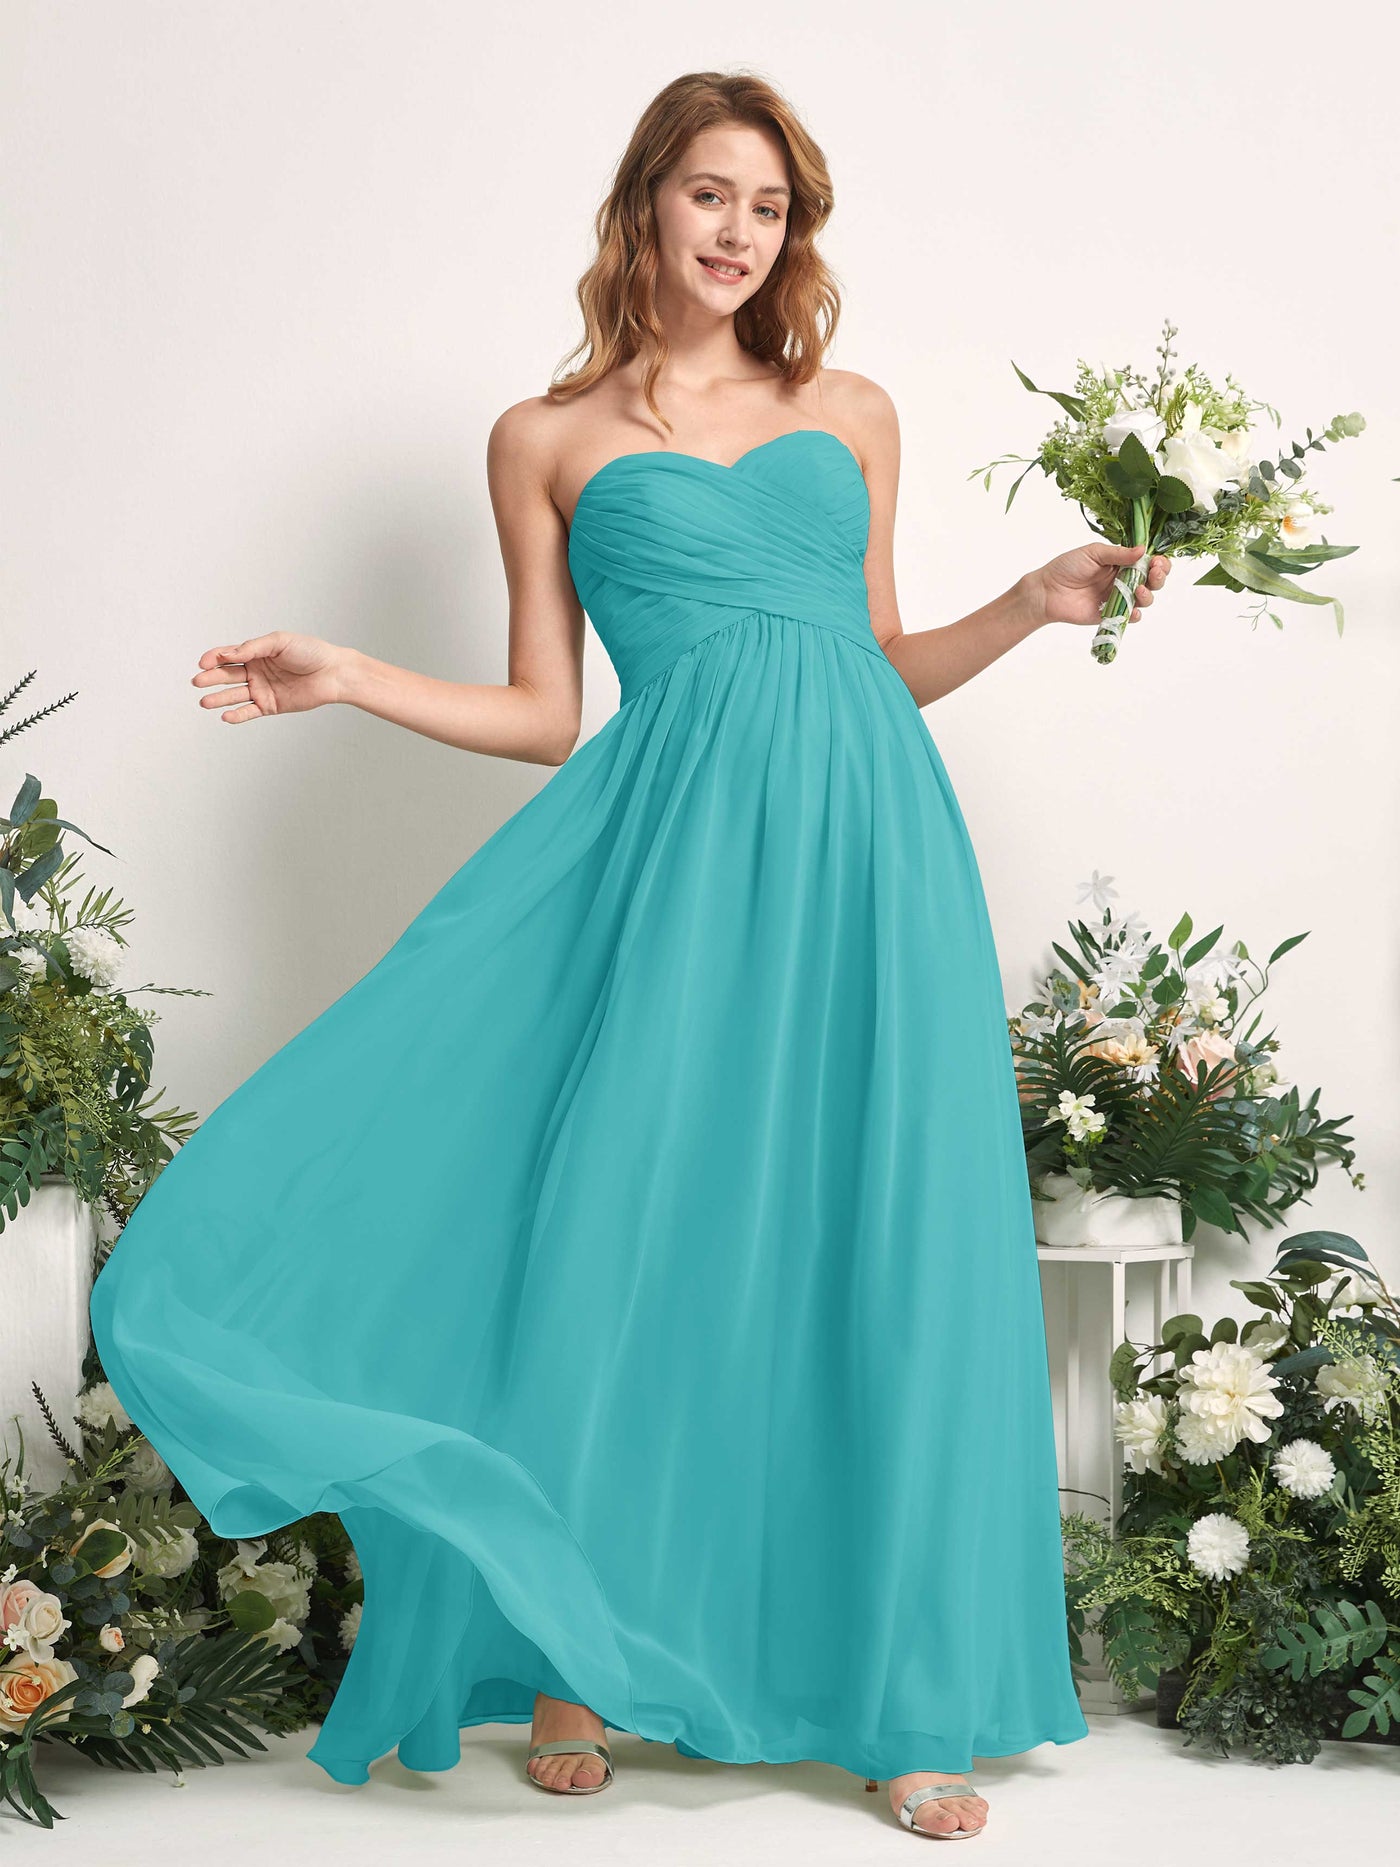 Bridesmaid Dress A-line Chiffon Sweetheart Full Length Sleeveless Wedding Party Dress - Turquoise (81226923)#color_turquoise